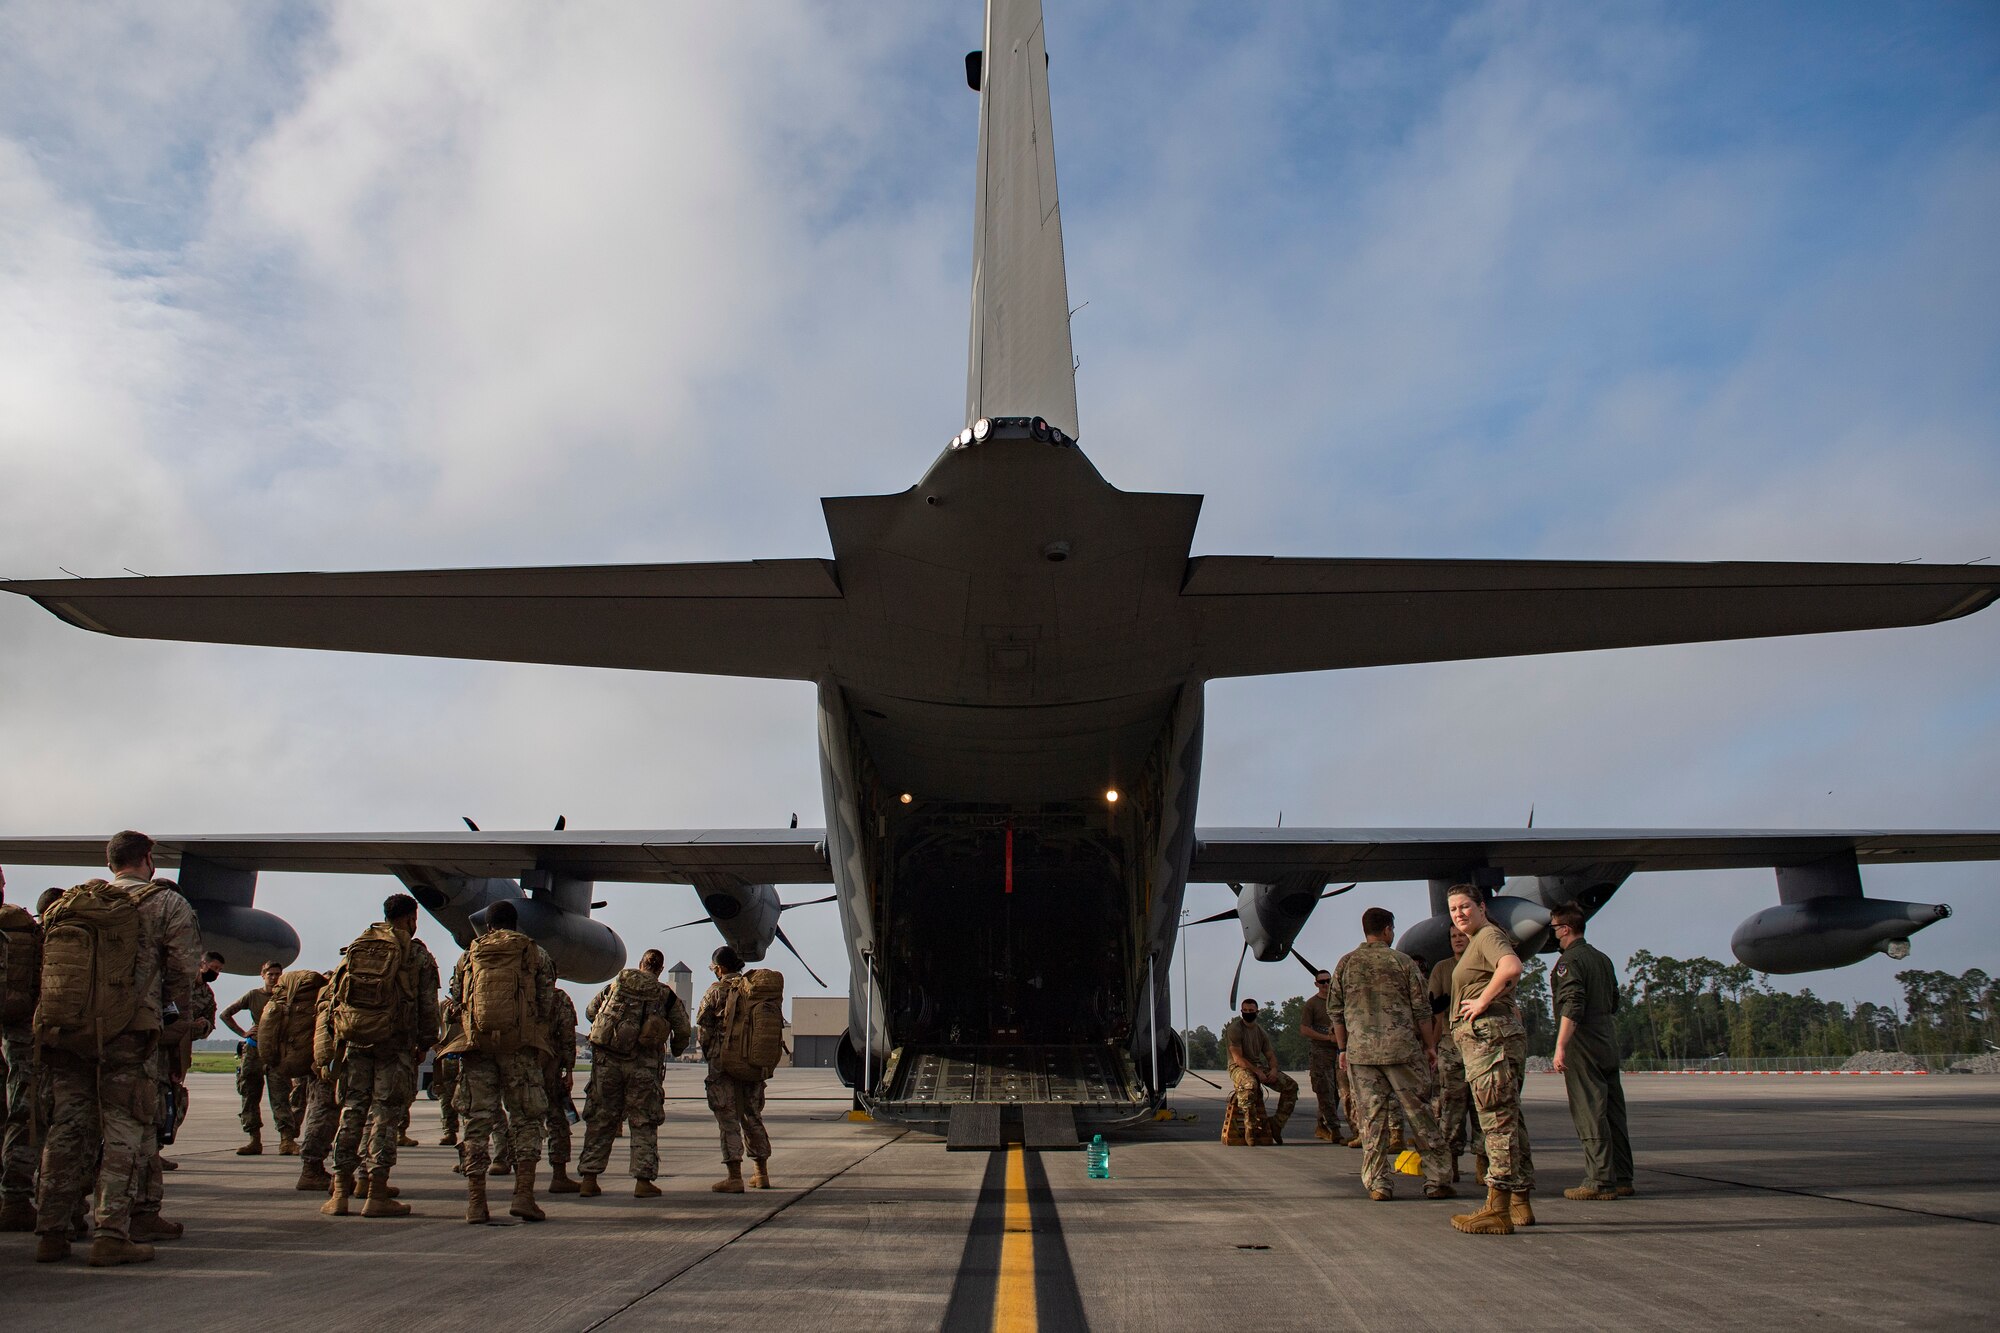 U.S. Air Force Airmen from the 822nd Base Defense Squadron prepare to load onto an HC-130J Combat King II cargo aircraft from the 71st Rescue Squadron at Moody Air Force Base, Georgia, Aug. 28, 2021. The 23rd Wing and the 93rd Air Ground Operations Wing partnered together to ensure the 822nd BDS Airmen could arrive at Holloman Air Force Base, New Mexico, in support of Task Force – Holloman. The Department of Defense, through U.S. Northern Command, and in support of the Department of Homeland Security, is providing transportation, temporary housing, medical screening, and general support for at least 50,000 Afghan evacuees at suitable facilities, in permanent or temporary structures, as quickly as possible. This initiative provides Afghan personnel essential support at secure locations outside Afghanistan. (U.S. Air Force photo by Master Sgt. Daryl Knee)